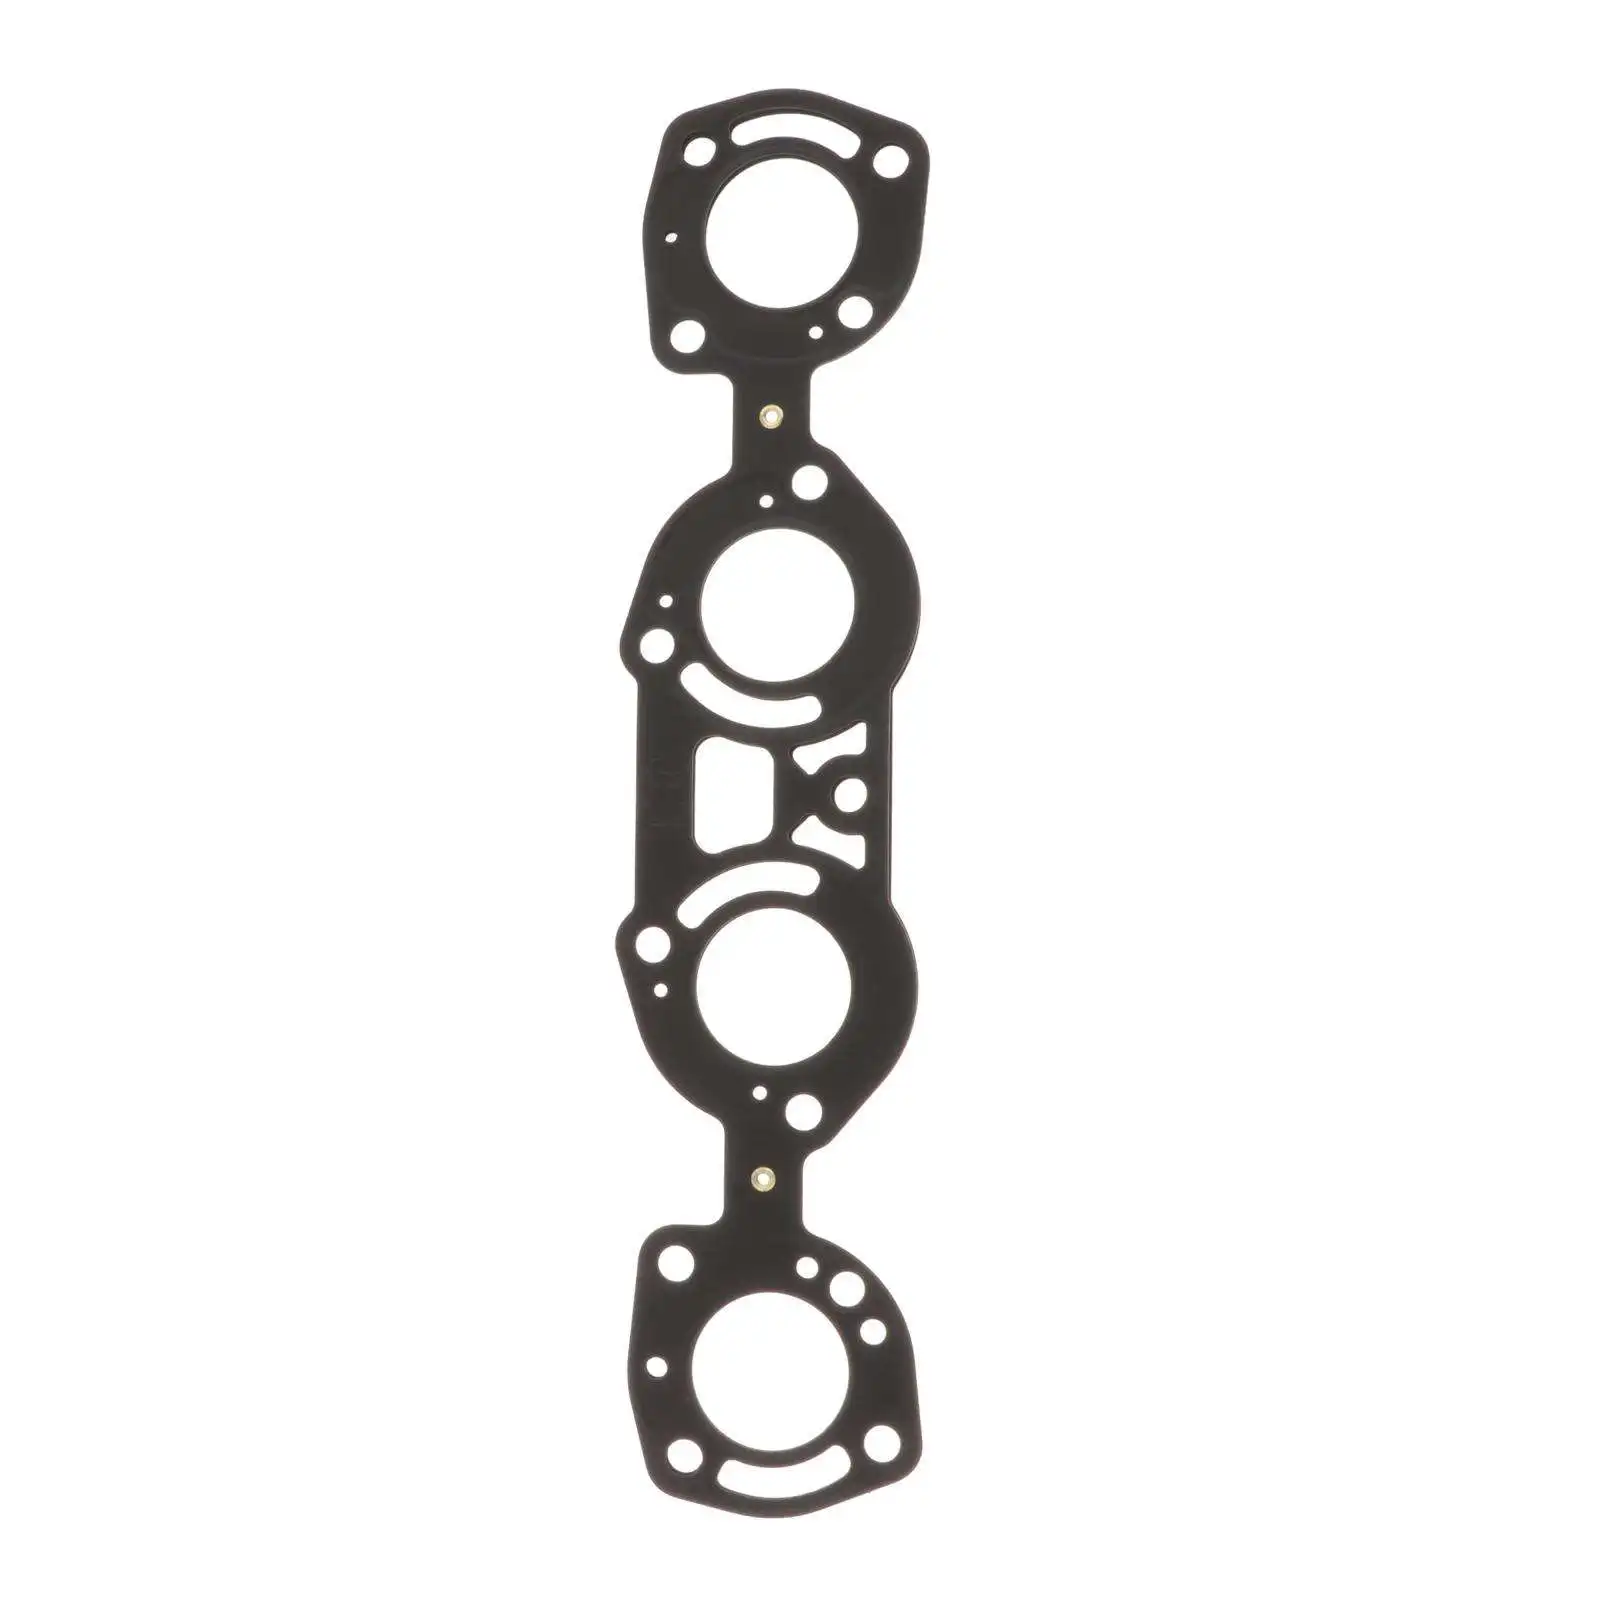 Exhaust Pipe Gasket , Fit for  FZR1800 GP1800, 6ET-14613-00-00 , Replace